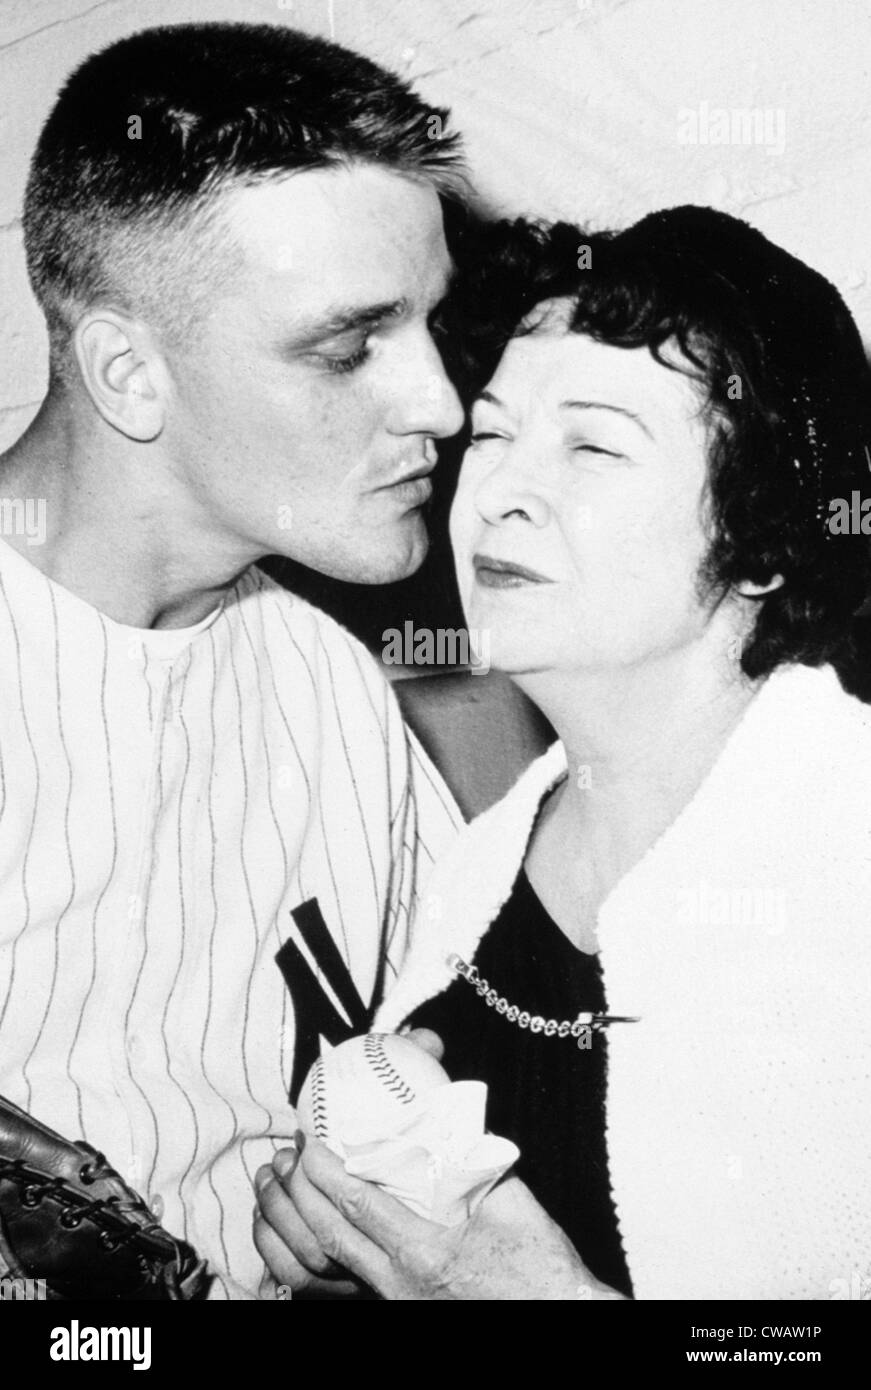 Roger Maris (NY Yankees) with Mrs. Babe Ruth after hitting 60th home run, 1961.. Courtesy: CSU Archives / Everett Collection Stock Photo